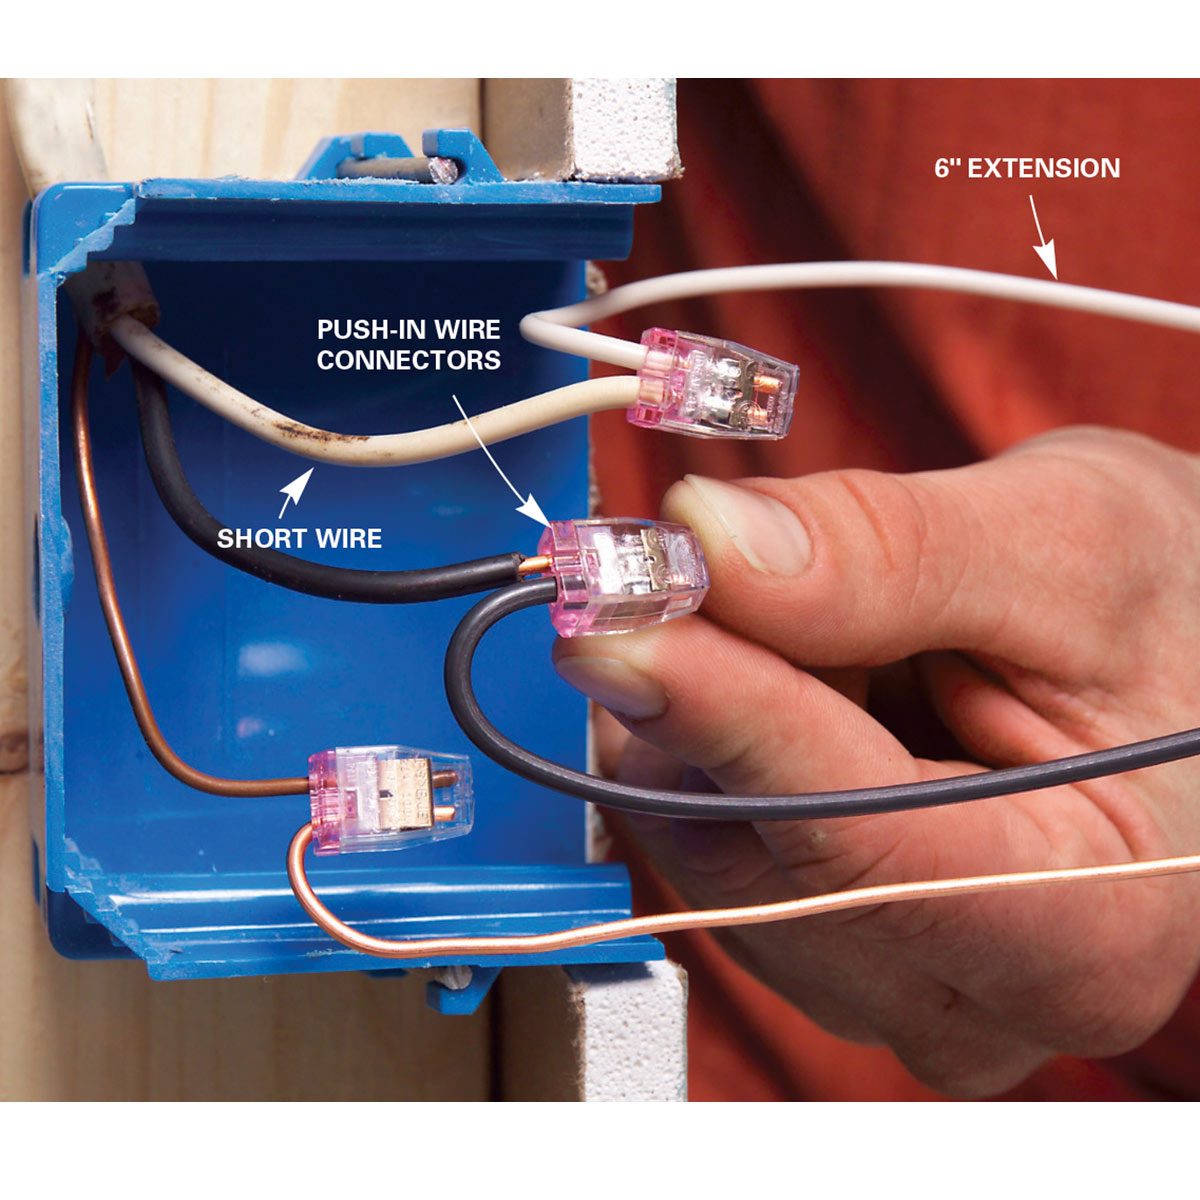 Wiring this utility trailer kit with poor instructions. Are these blue clips  to splice the side lamp wire, or for something else? How do they work? Is  there a better way ? 